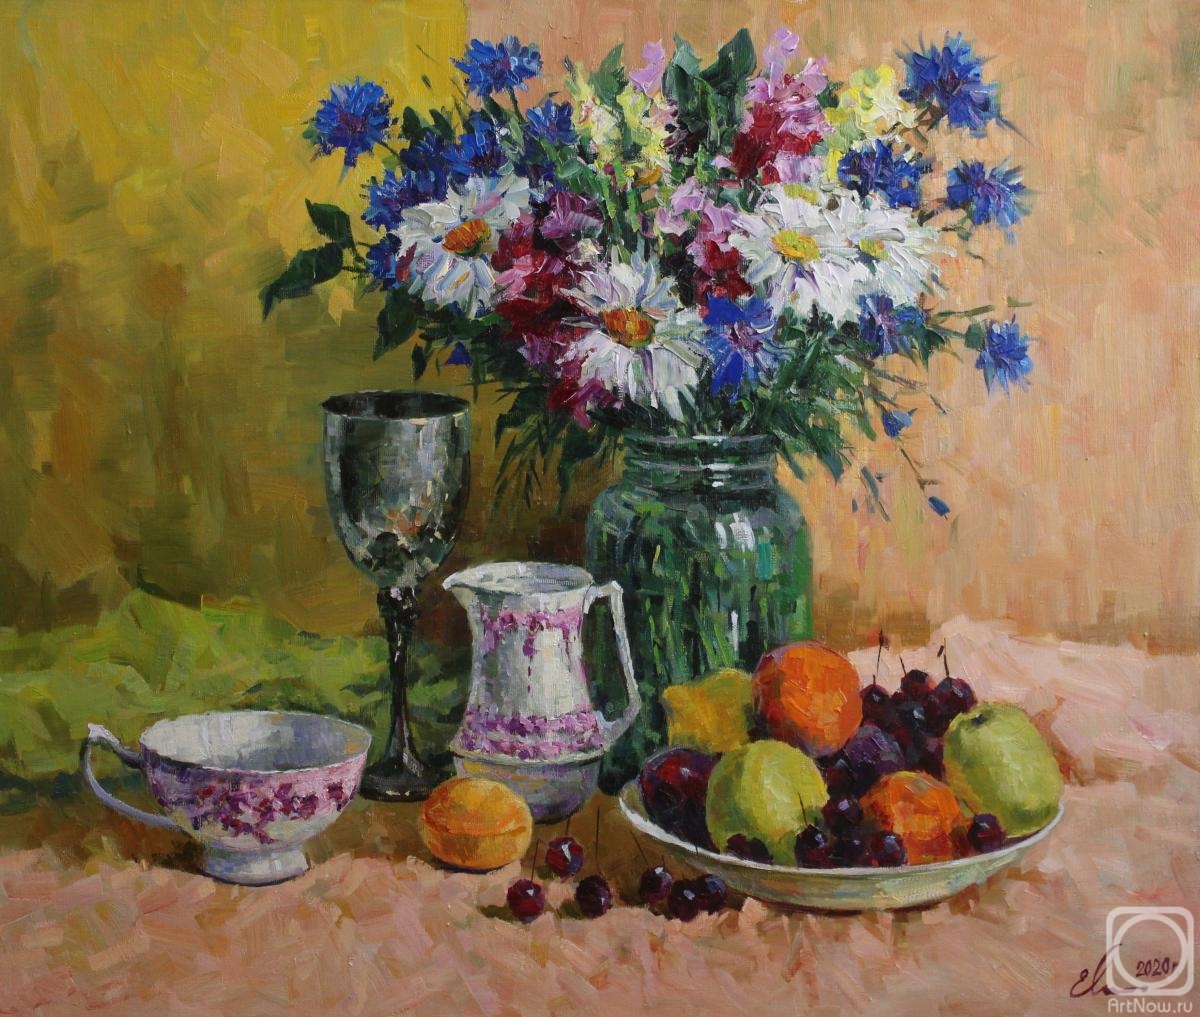 Malykh Evgeny. A bouquet of country flowers